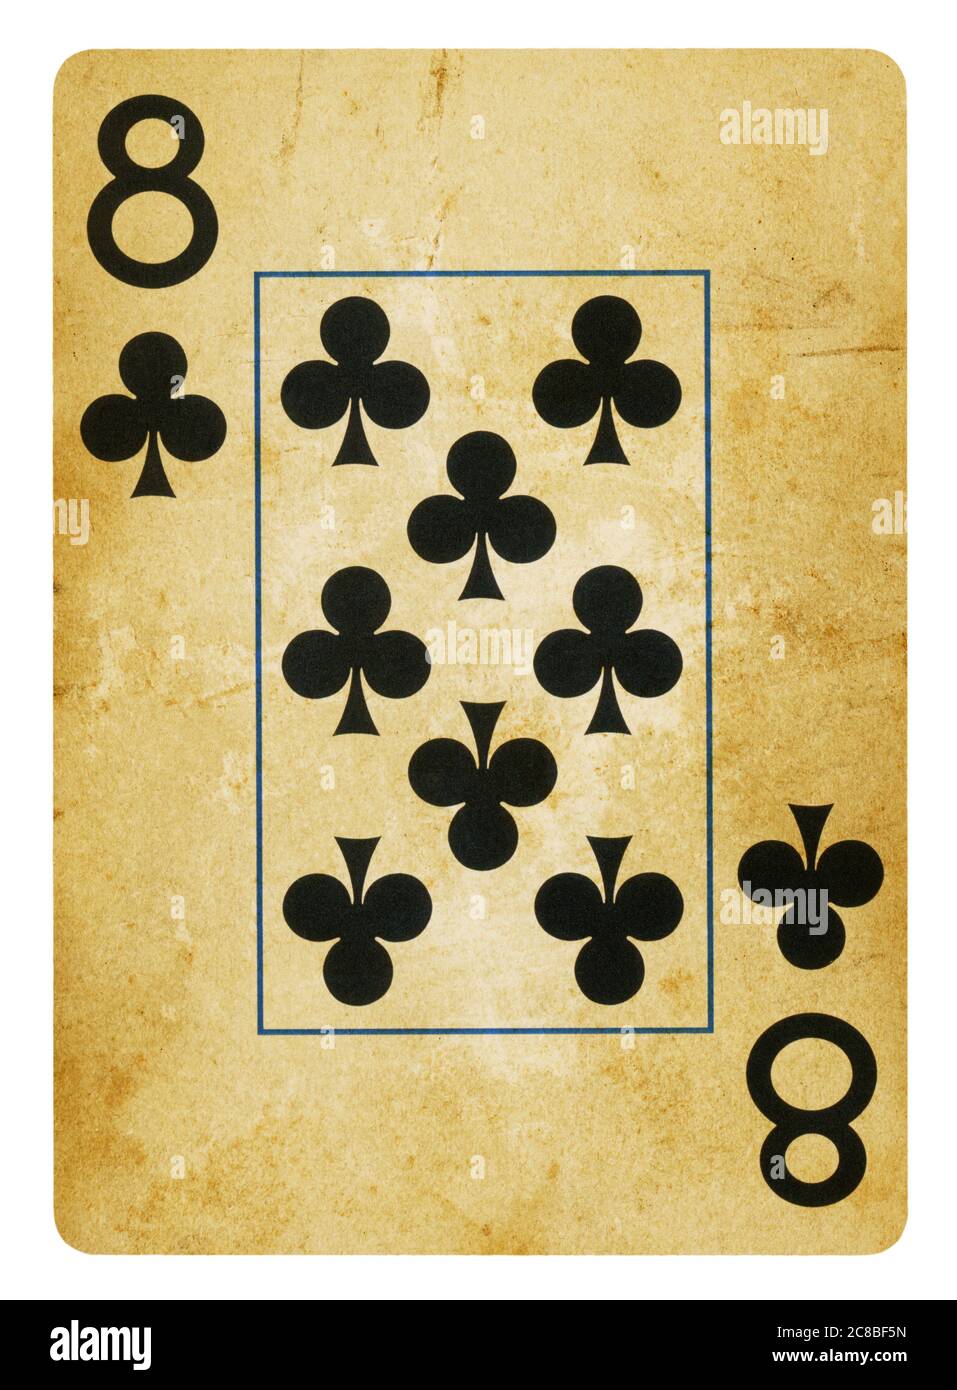 Huit Clubs de Vintage playing card - isolated on white (chemin inclus) Banque D'Images